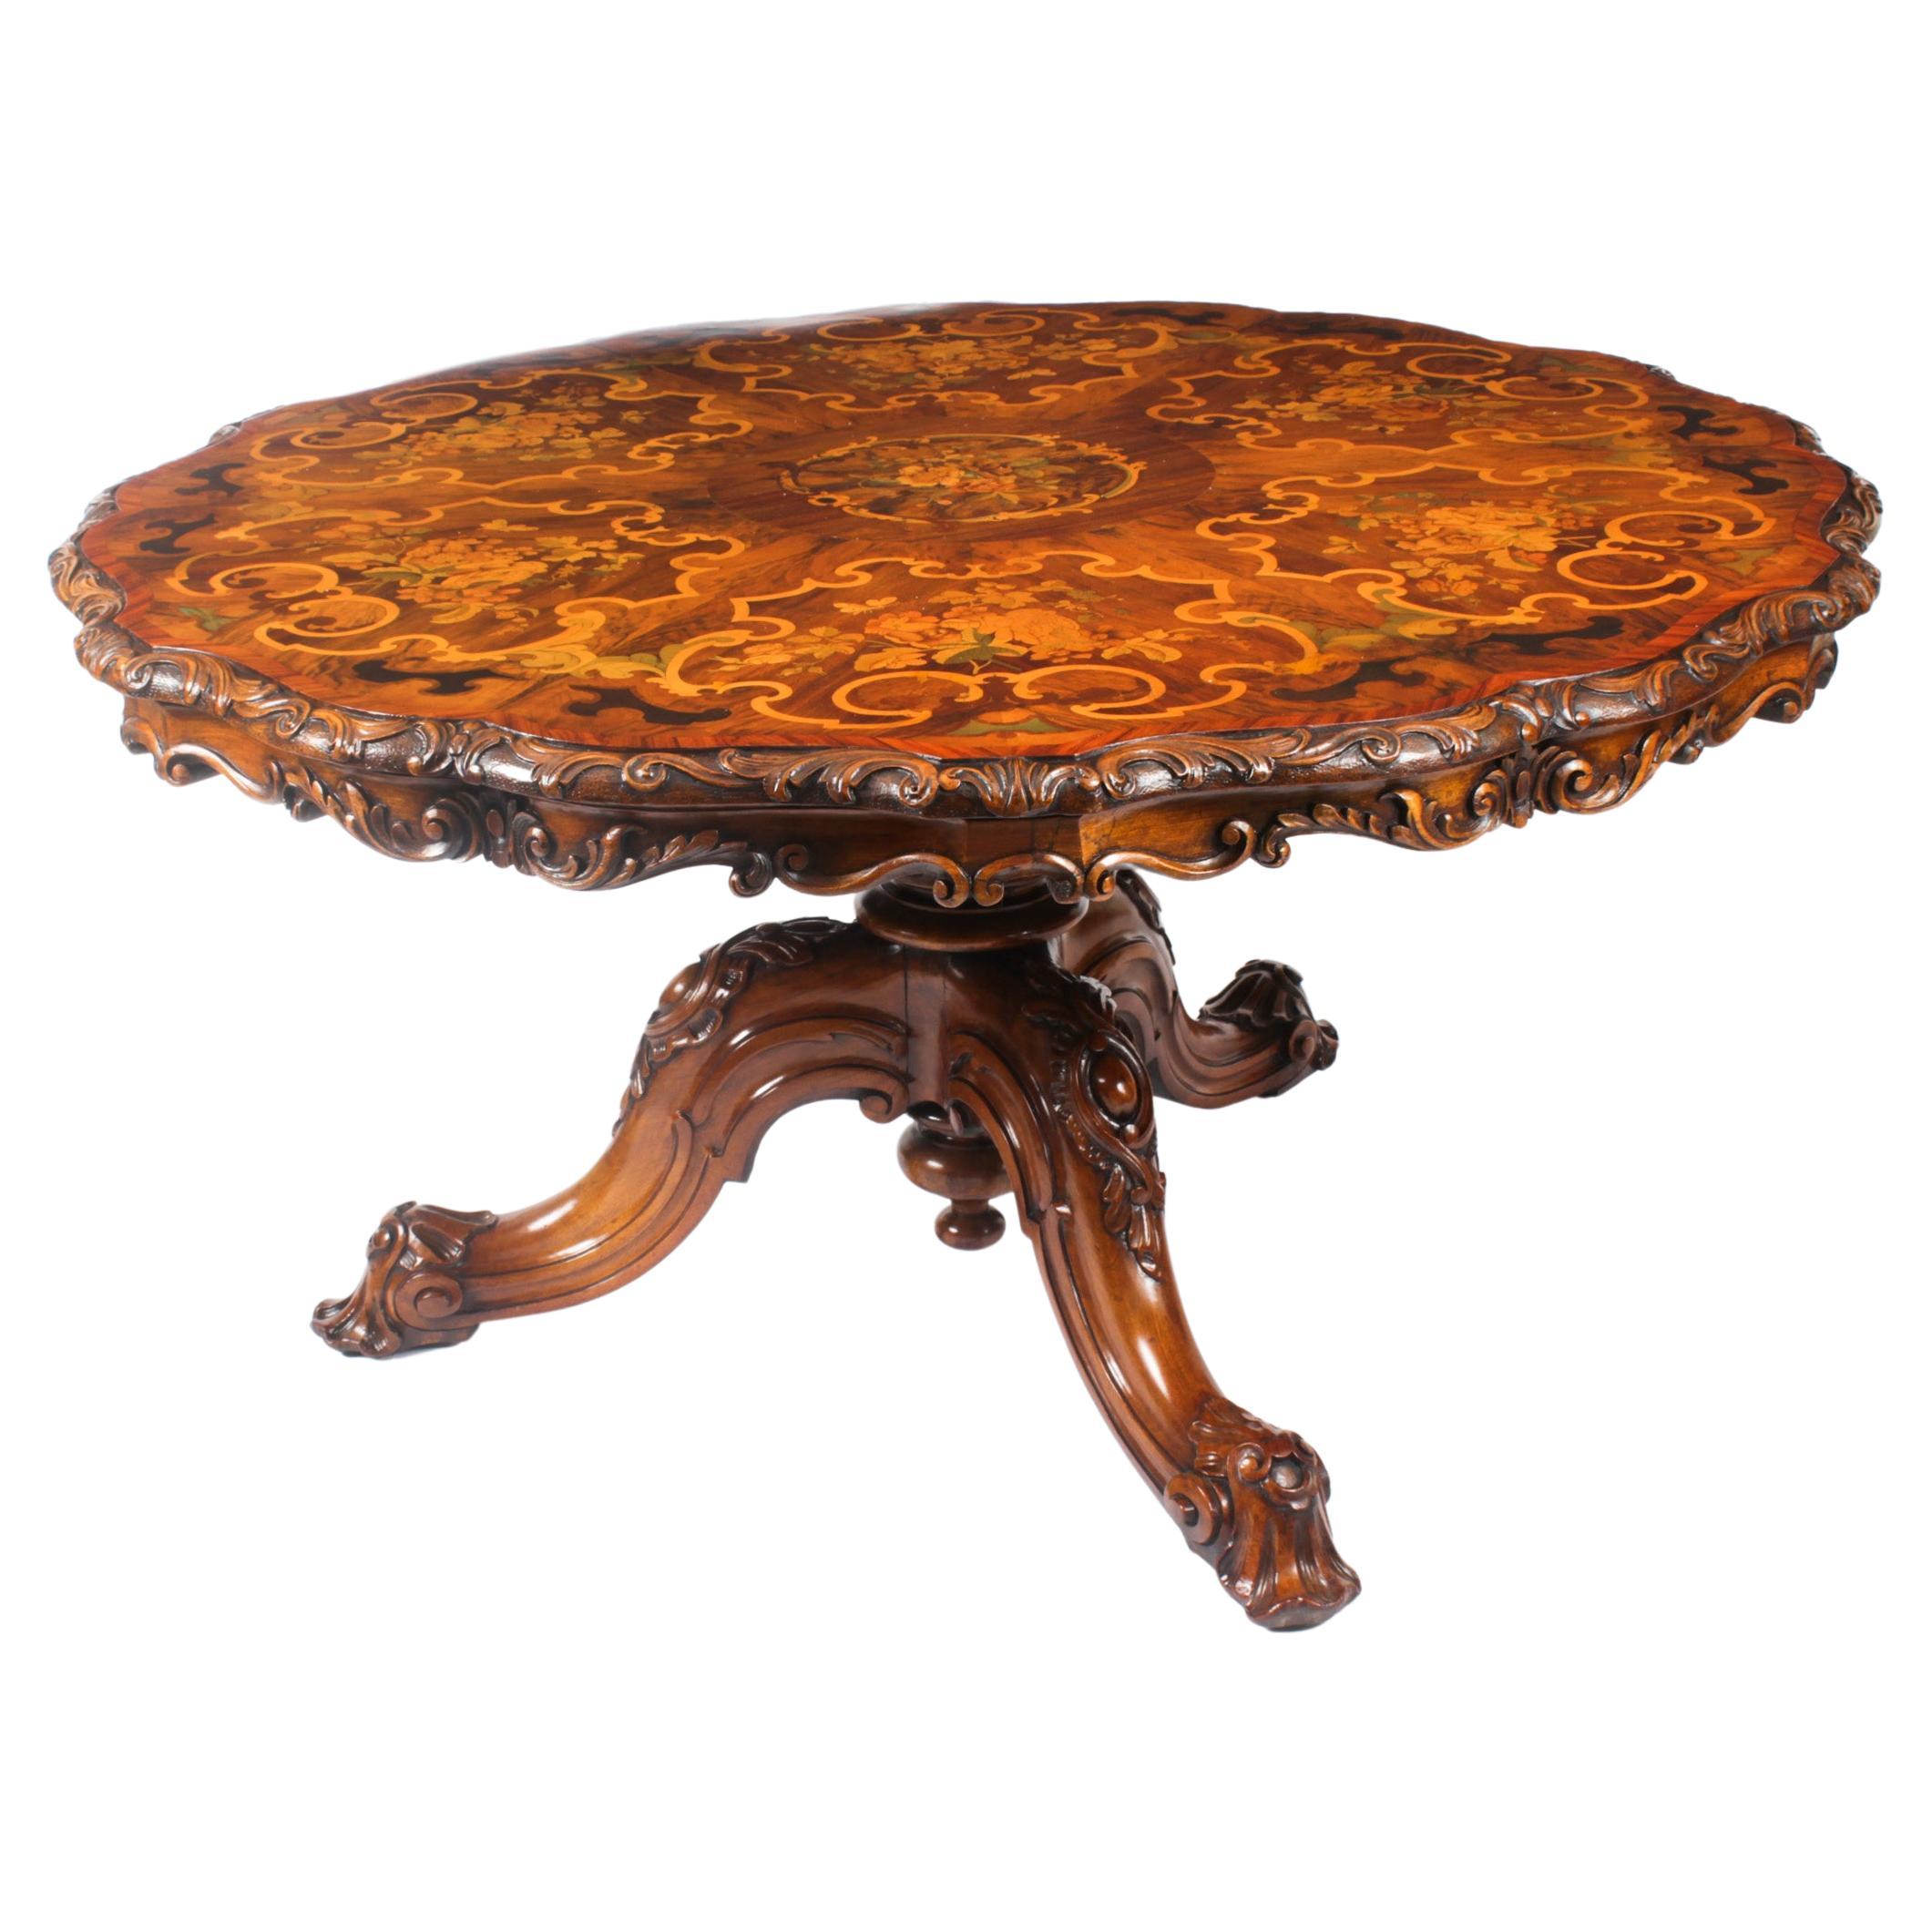 Antique Burr Walnut Marquetry Dining / Centre Table 19th Century